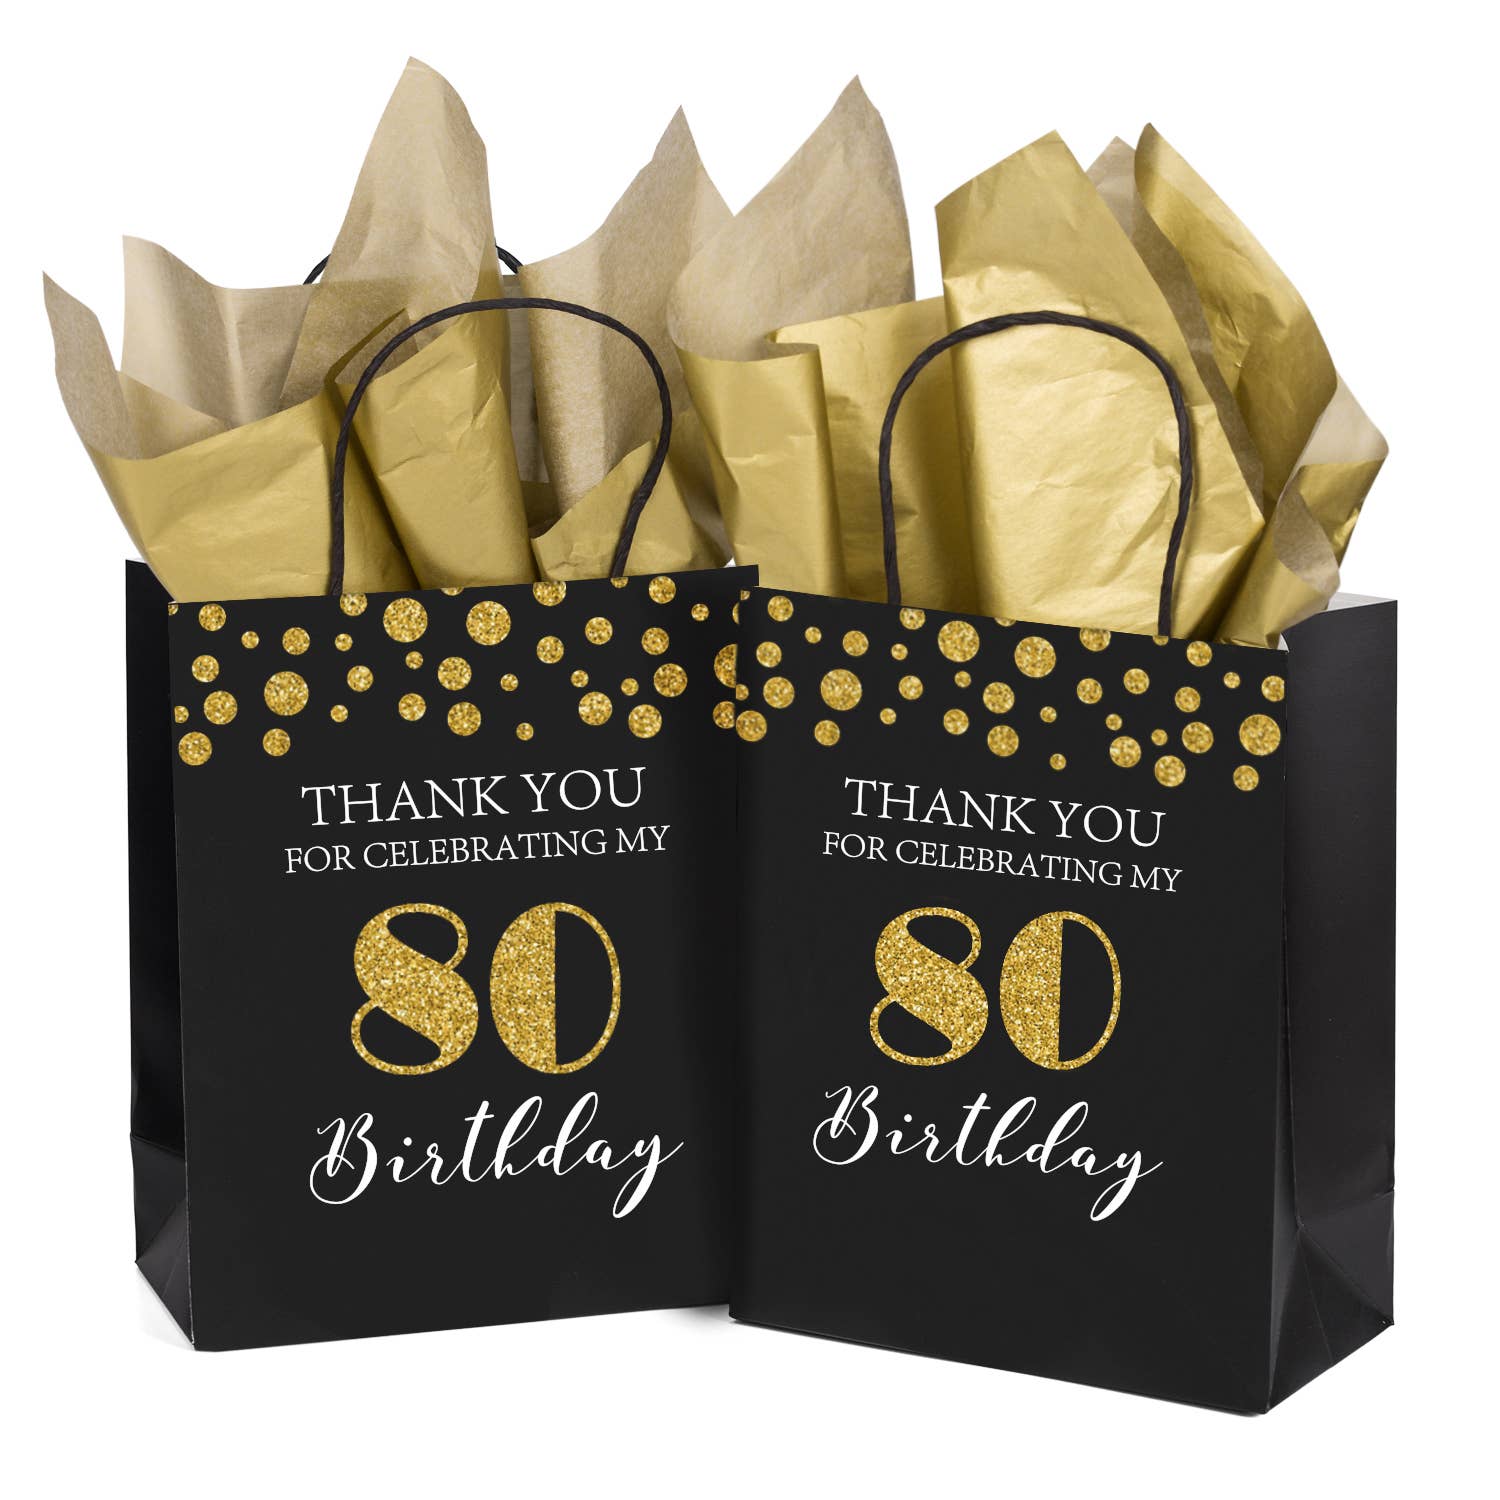 30 LARGE BLACK LAMINATED GLOSS GIFT BAGS ROPE HANDLE BIRTHDAY FAVOURS 22x10x27cm